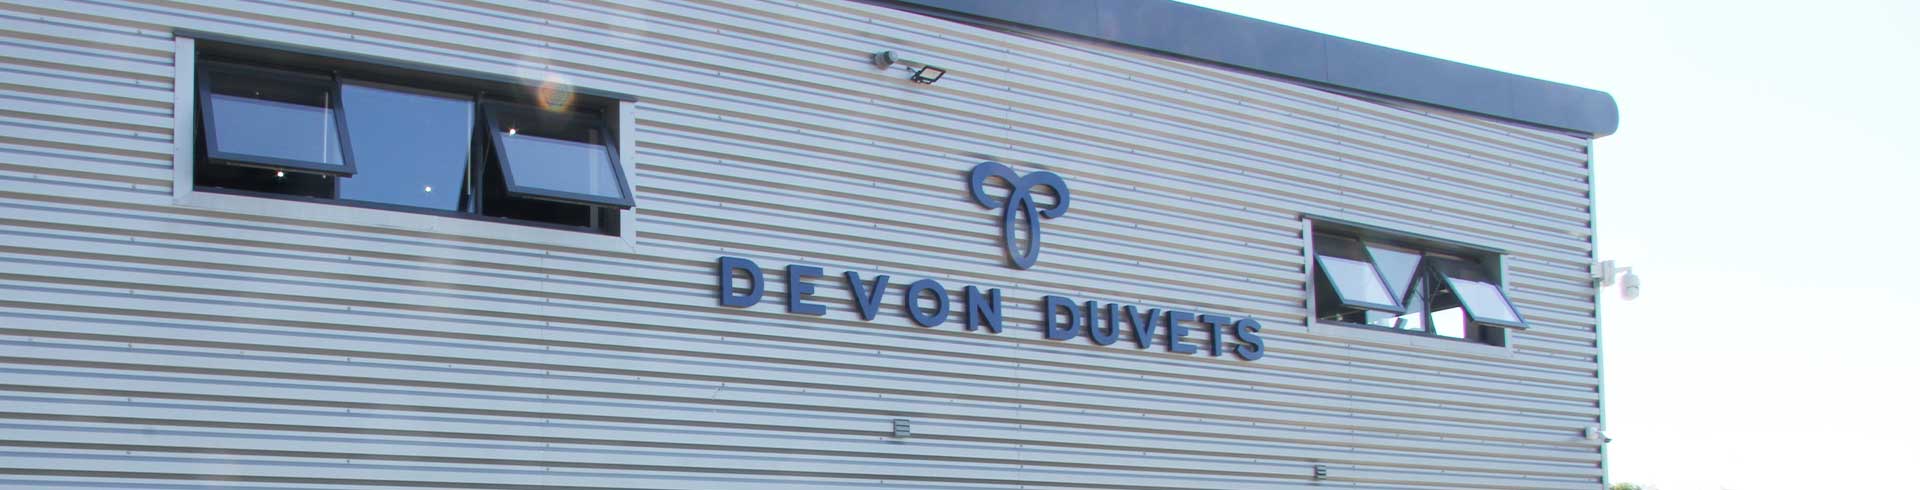 Purpose-built, energy-efficient Devon Duvets workshop where luxury bedding products are handcrafted.